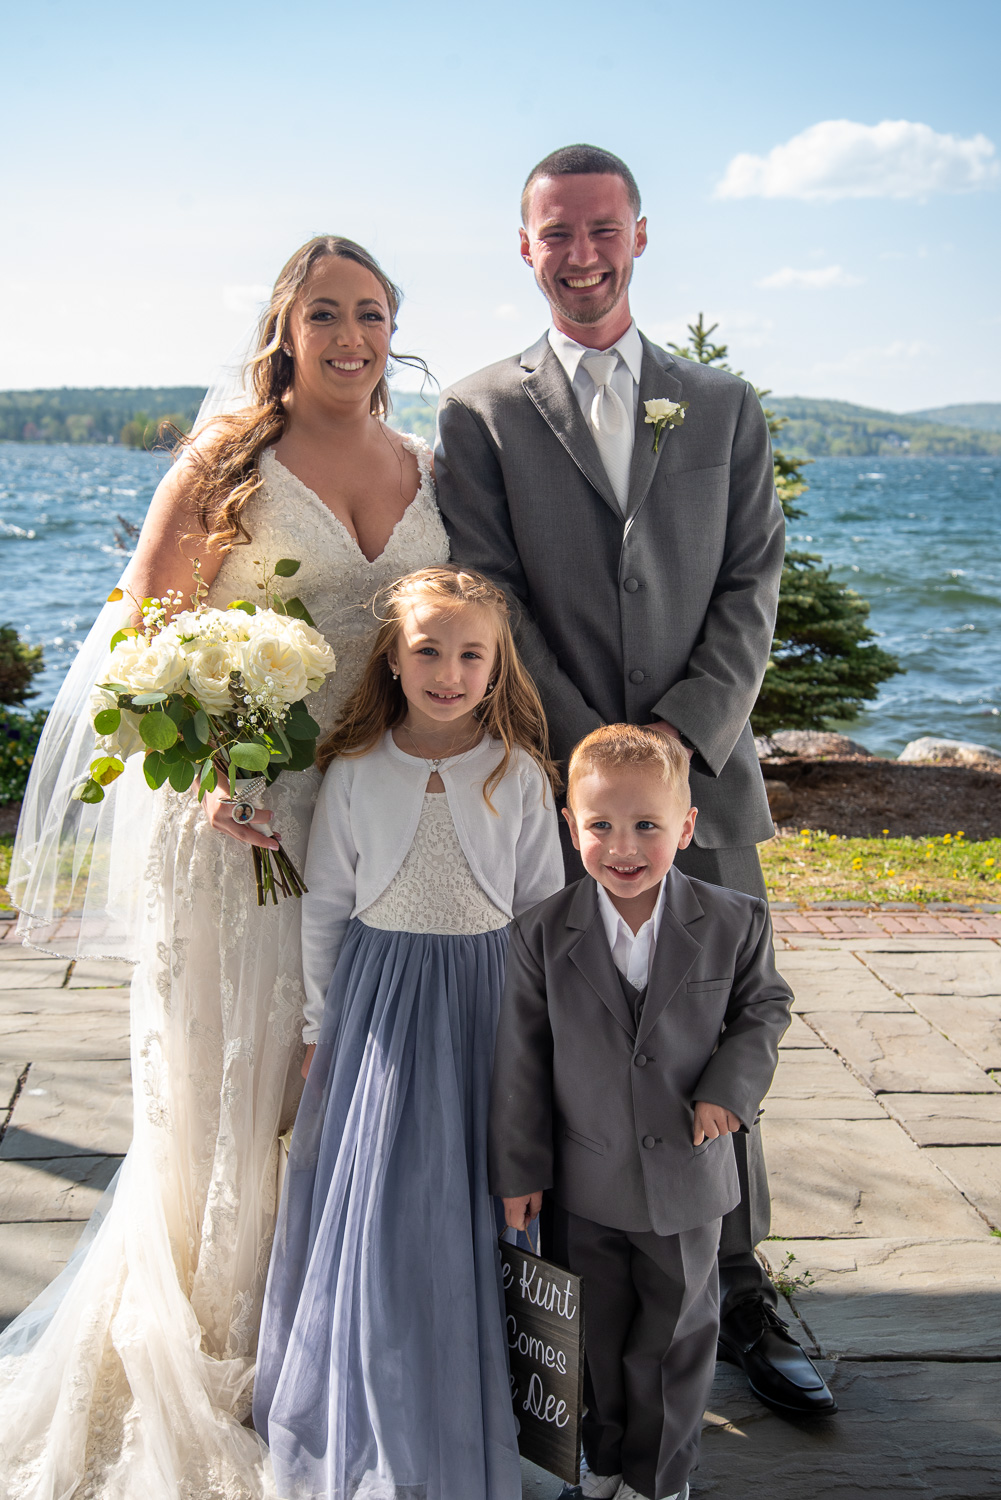 Bride, Groom, Flower girl and ring bearer after the lakeside wedding